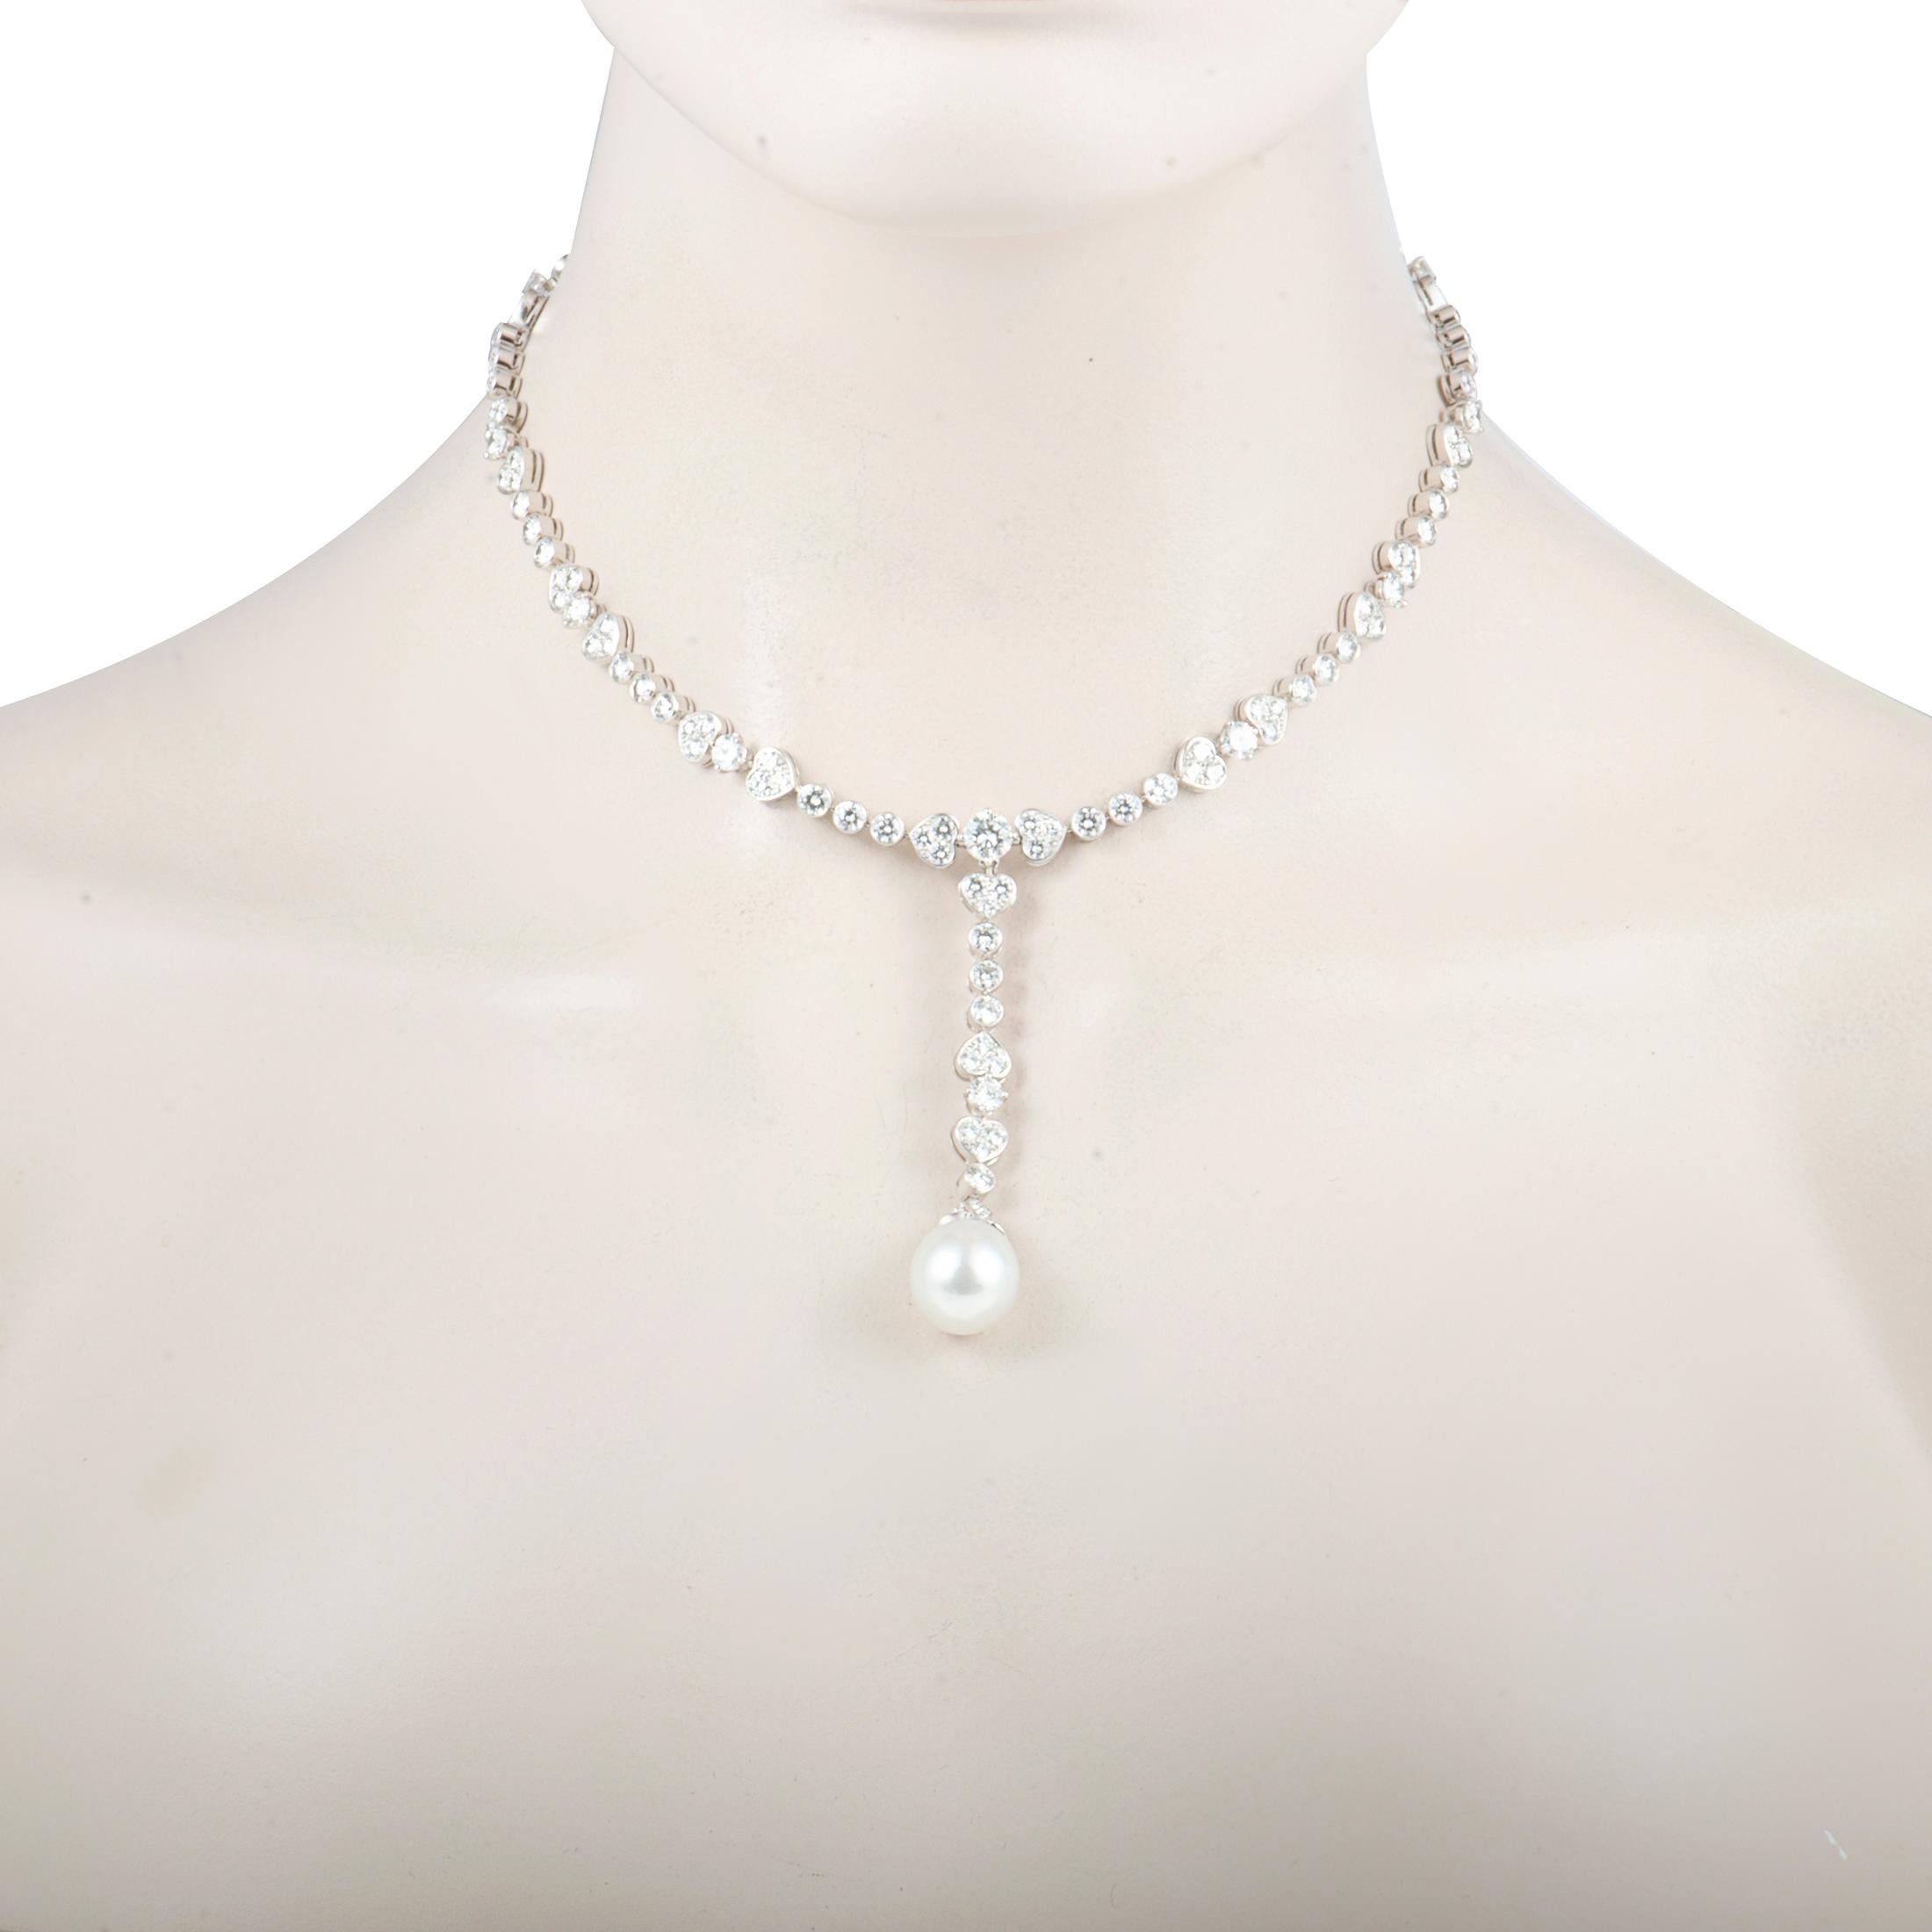 Brimming with elegance and grace, this incredible necklace is beautifully designed by Cartier in prestigious 18K white gold. The fashionably chic necklace is stunningly embellished with 21.00ct of scintillating E-color, VVS clarity diamonds and a